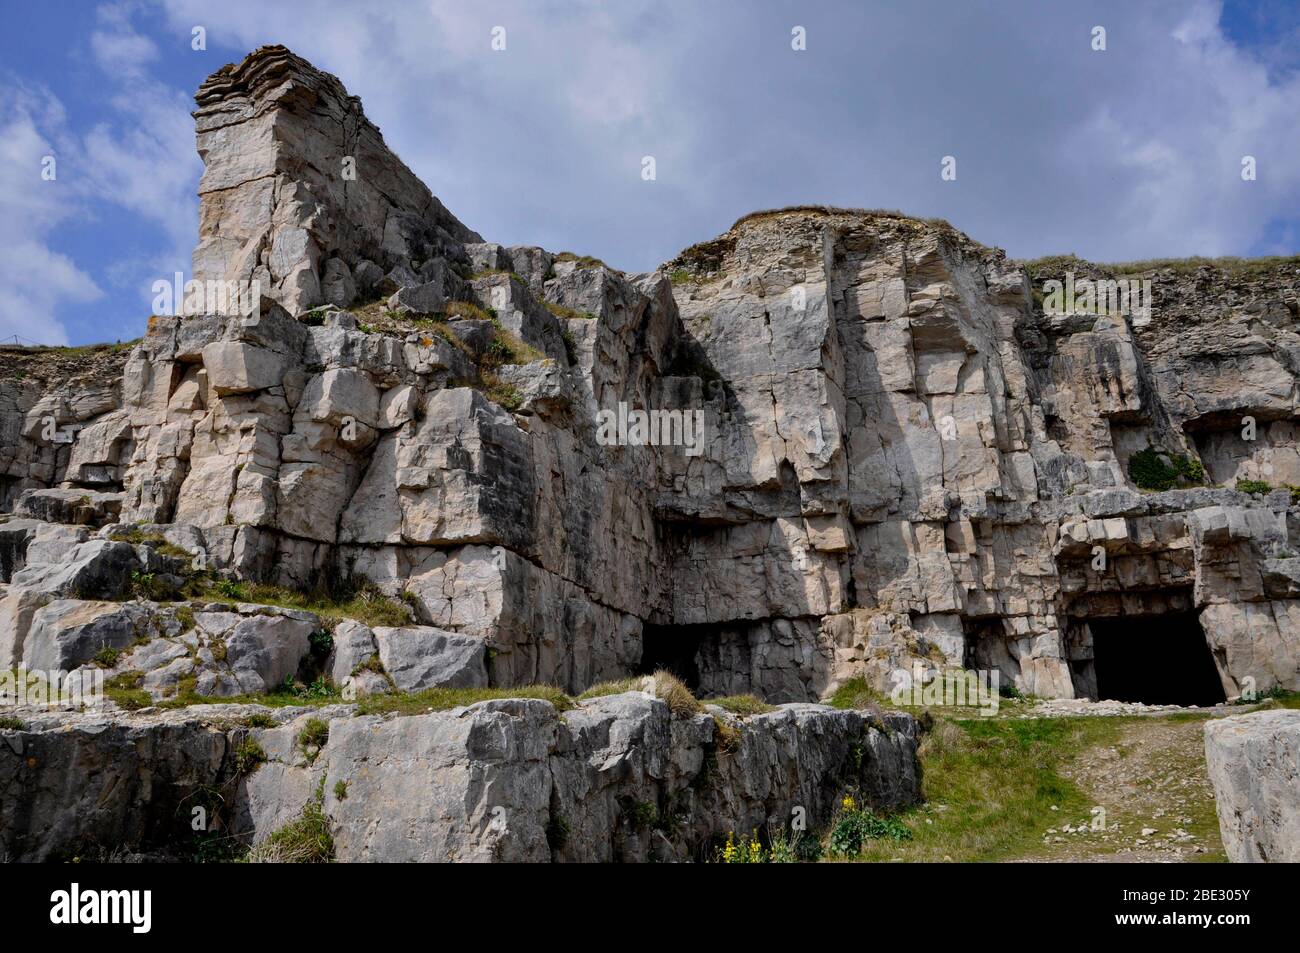 The disused quarry at Winspit cove on the Jurrasic coast near Worth Matravers on the Isle of Purbeck. Dorset.UK Stock Photo